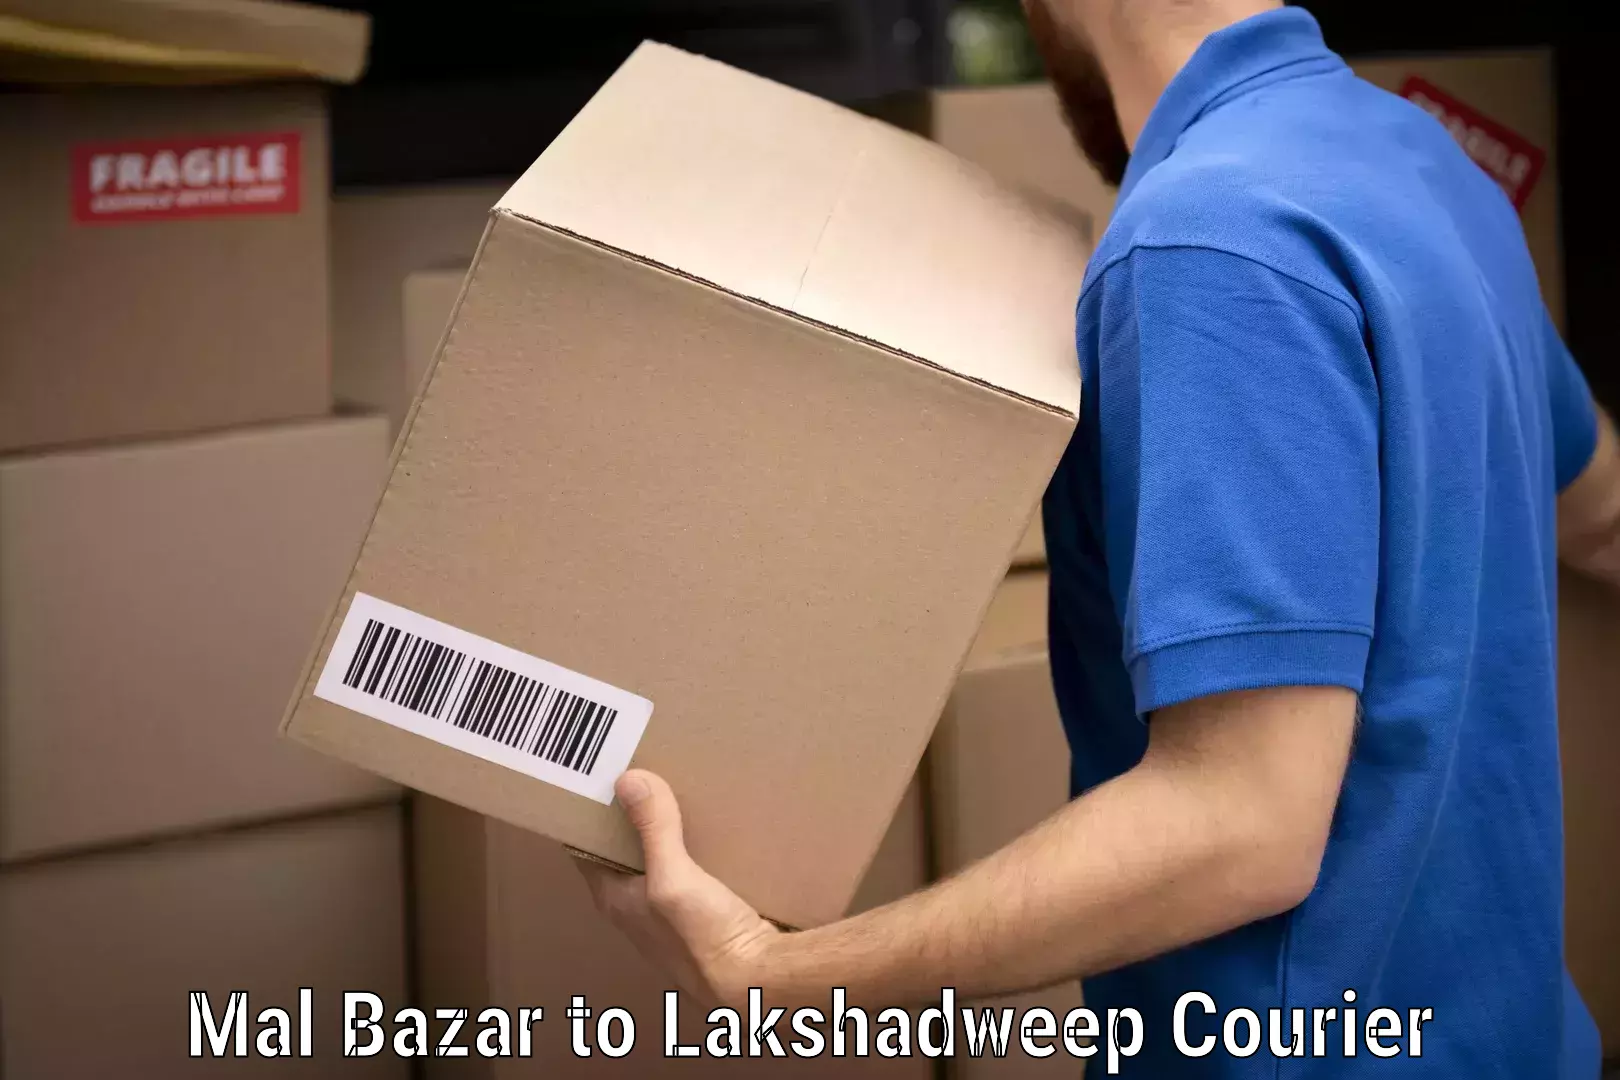 Home goods moving company Mal Bazar to Lakshadweep